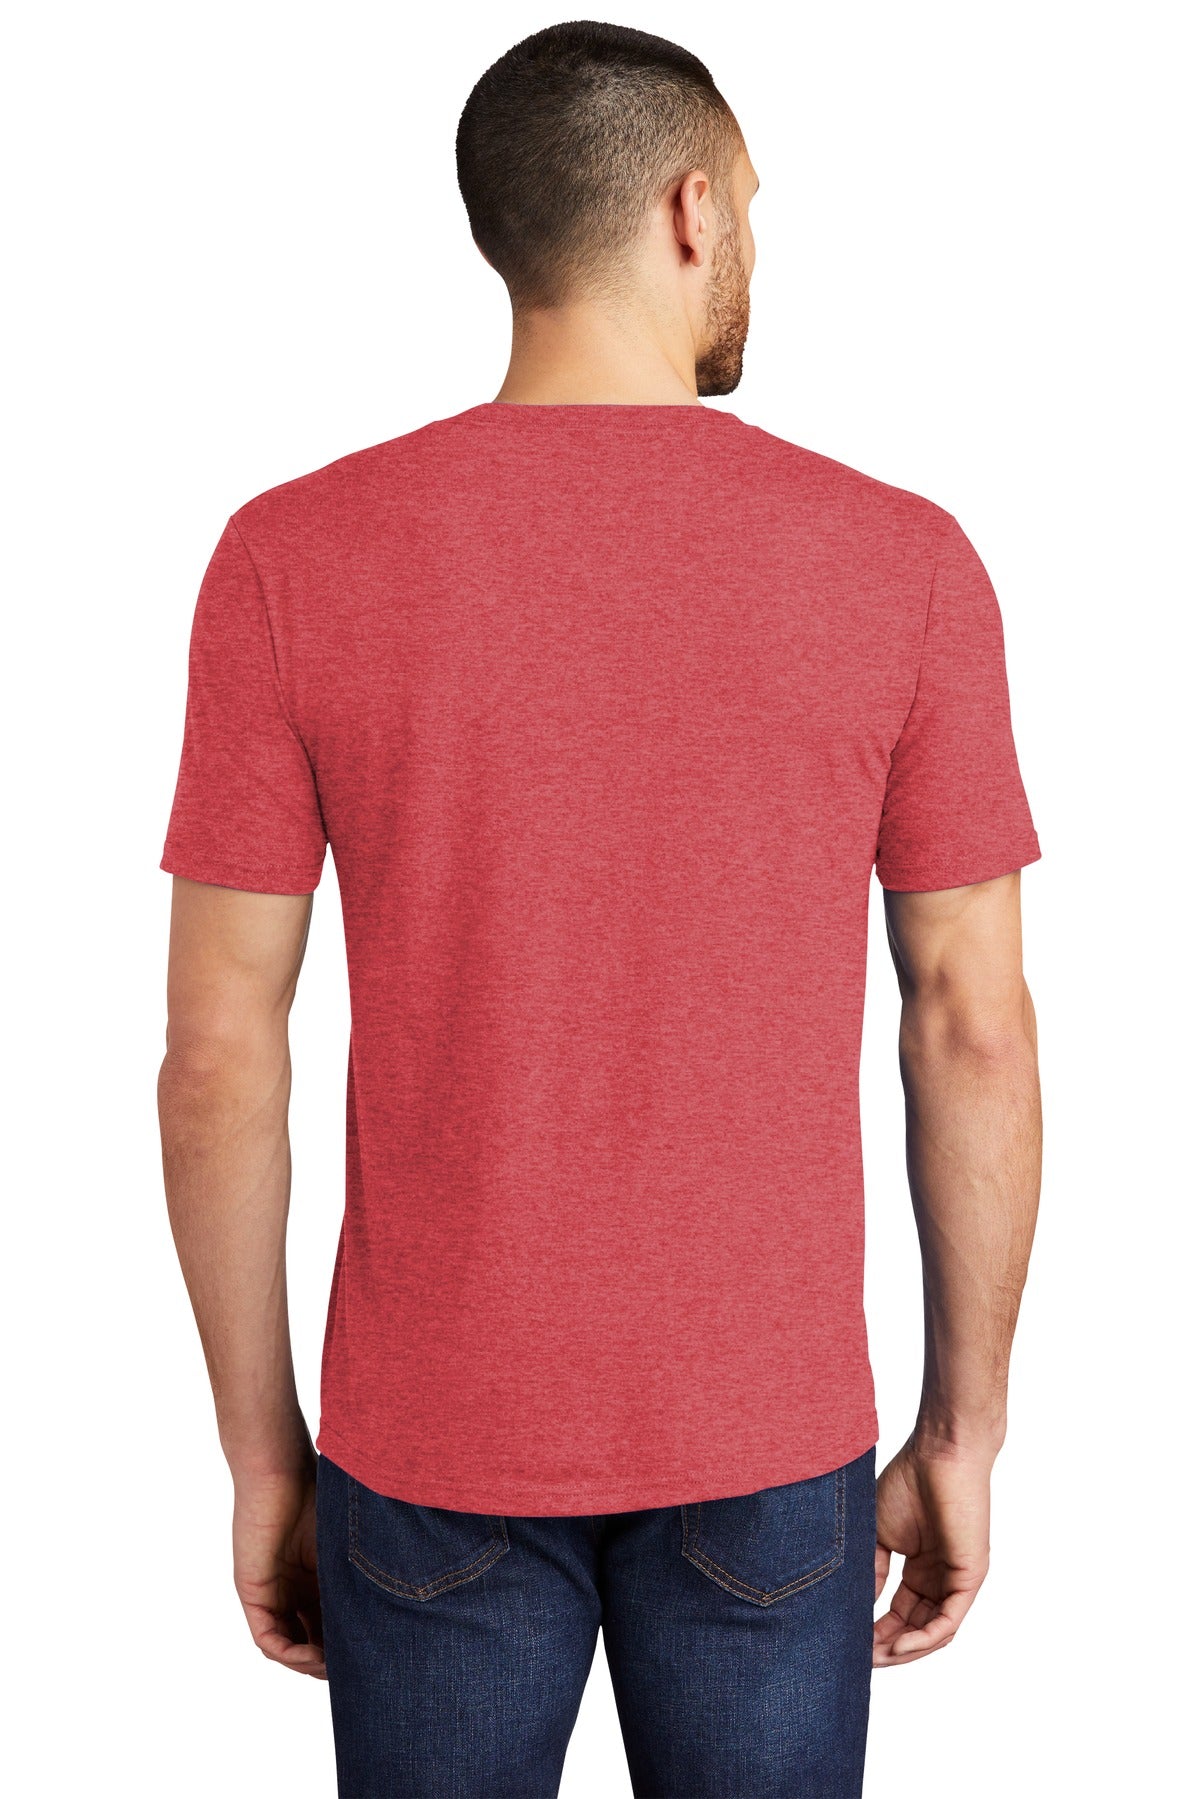 District ® Perfect Tri®Tee. DM130 [Red Frost] - DFW Impression